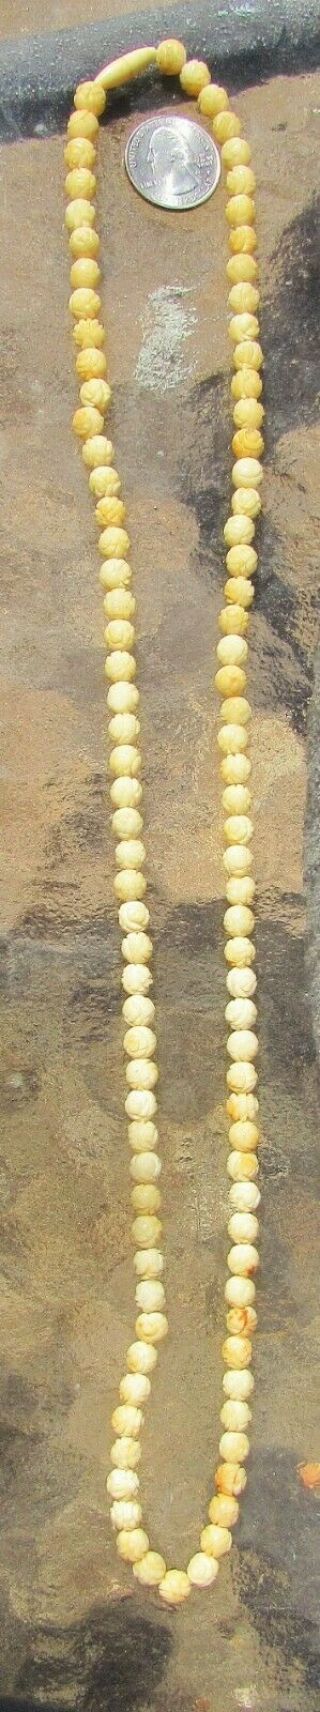 Gorgeous Vintage / Antique Carved Chinese Bakelite Beads Necklace 30 1/2 " Long